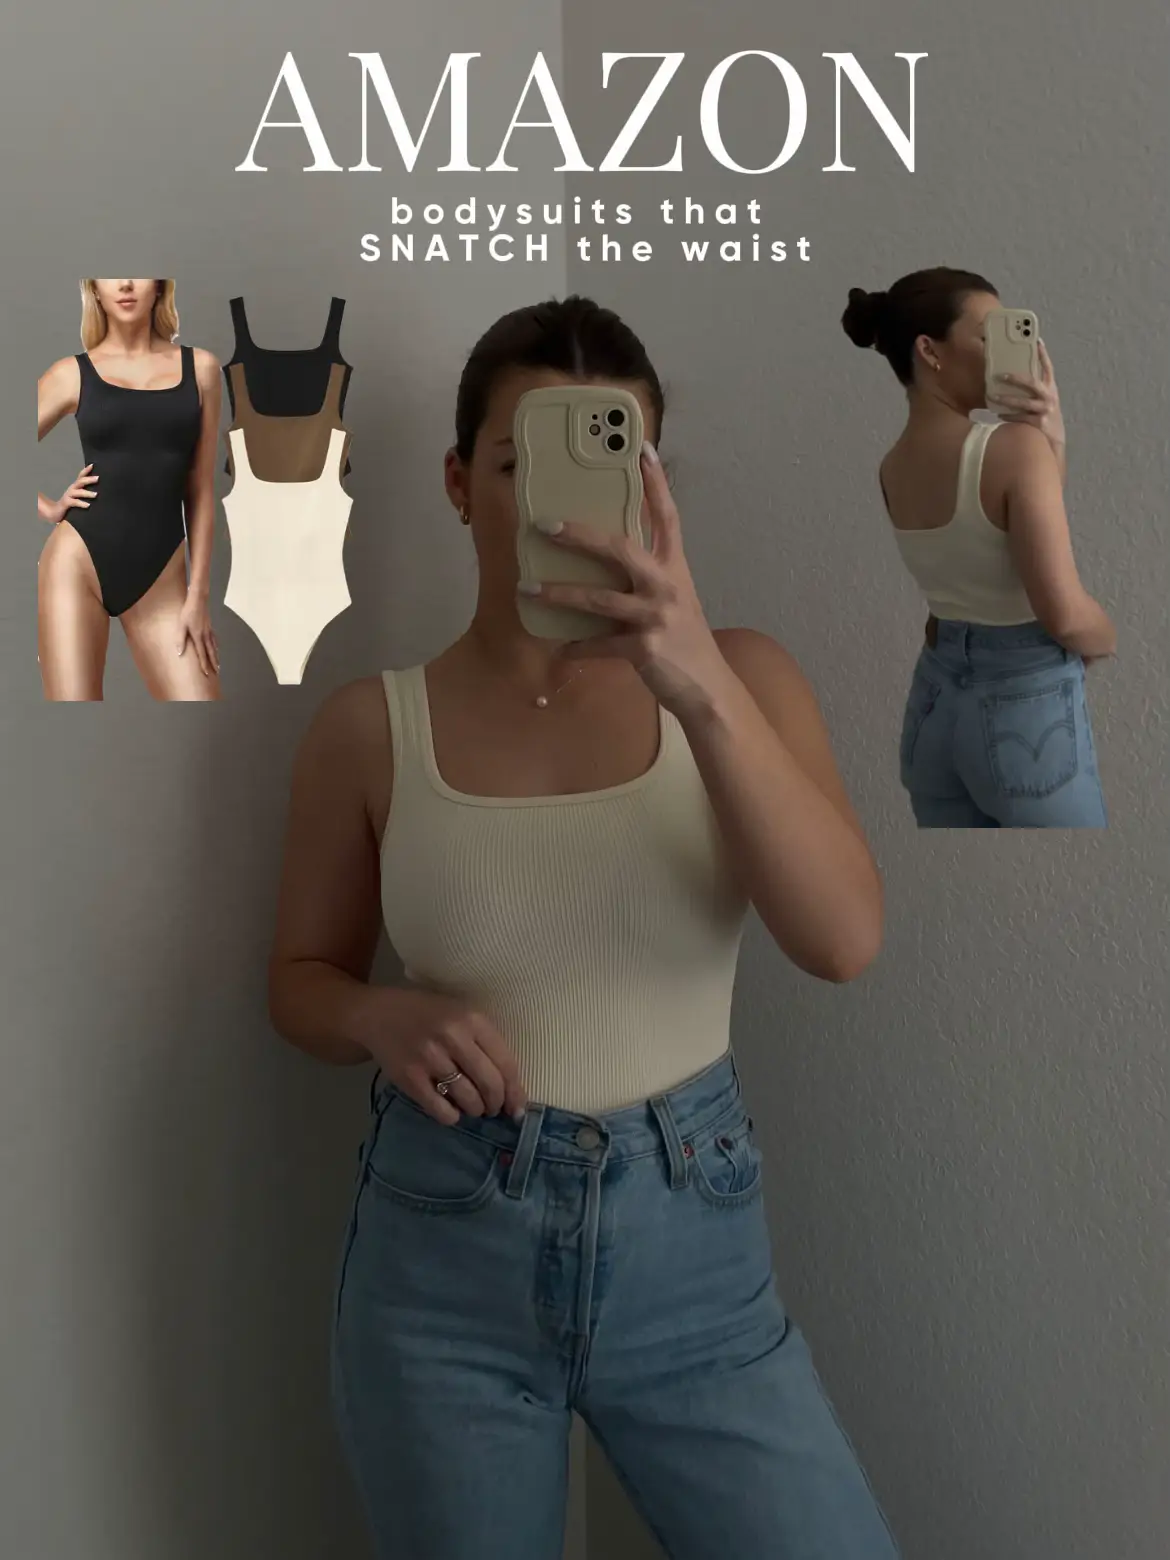 Viral waist snatching bodysuits, Gallery posted by Nina